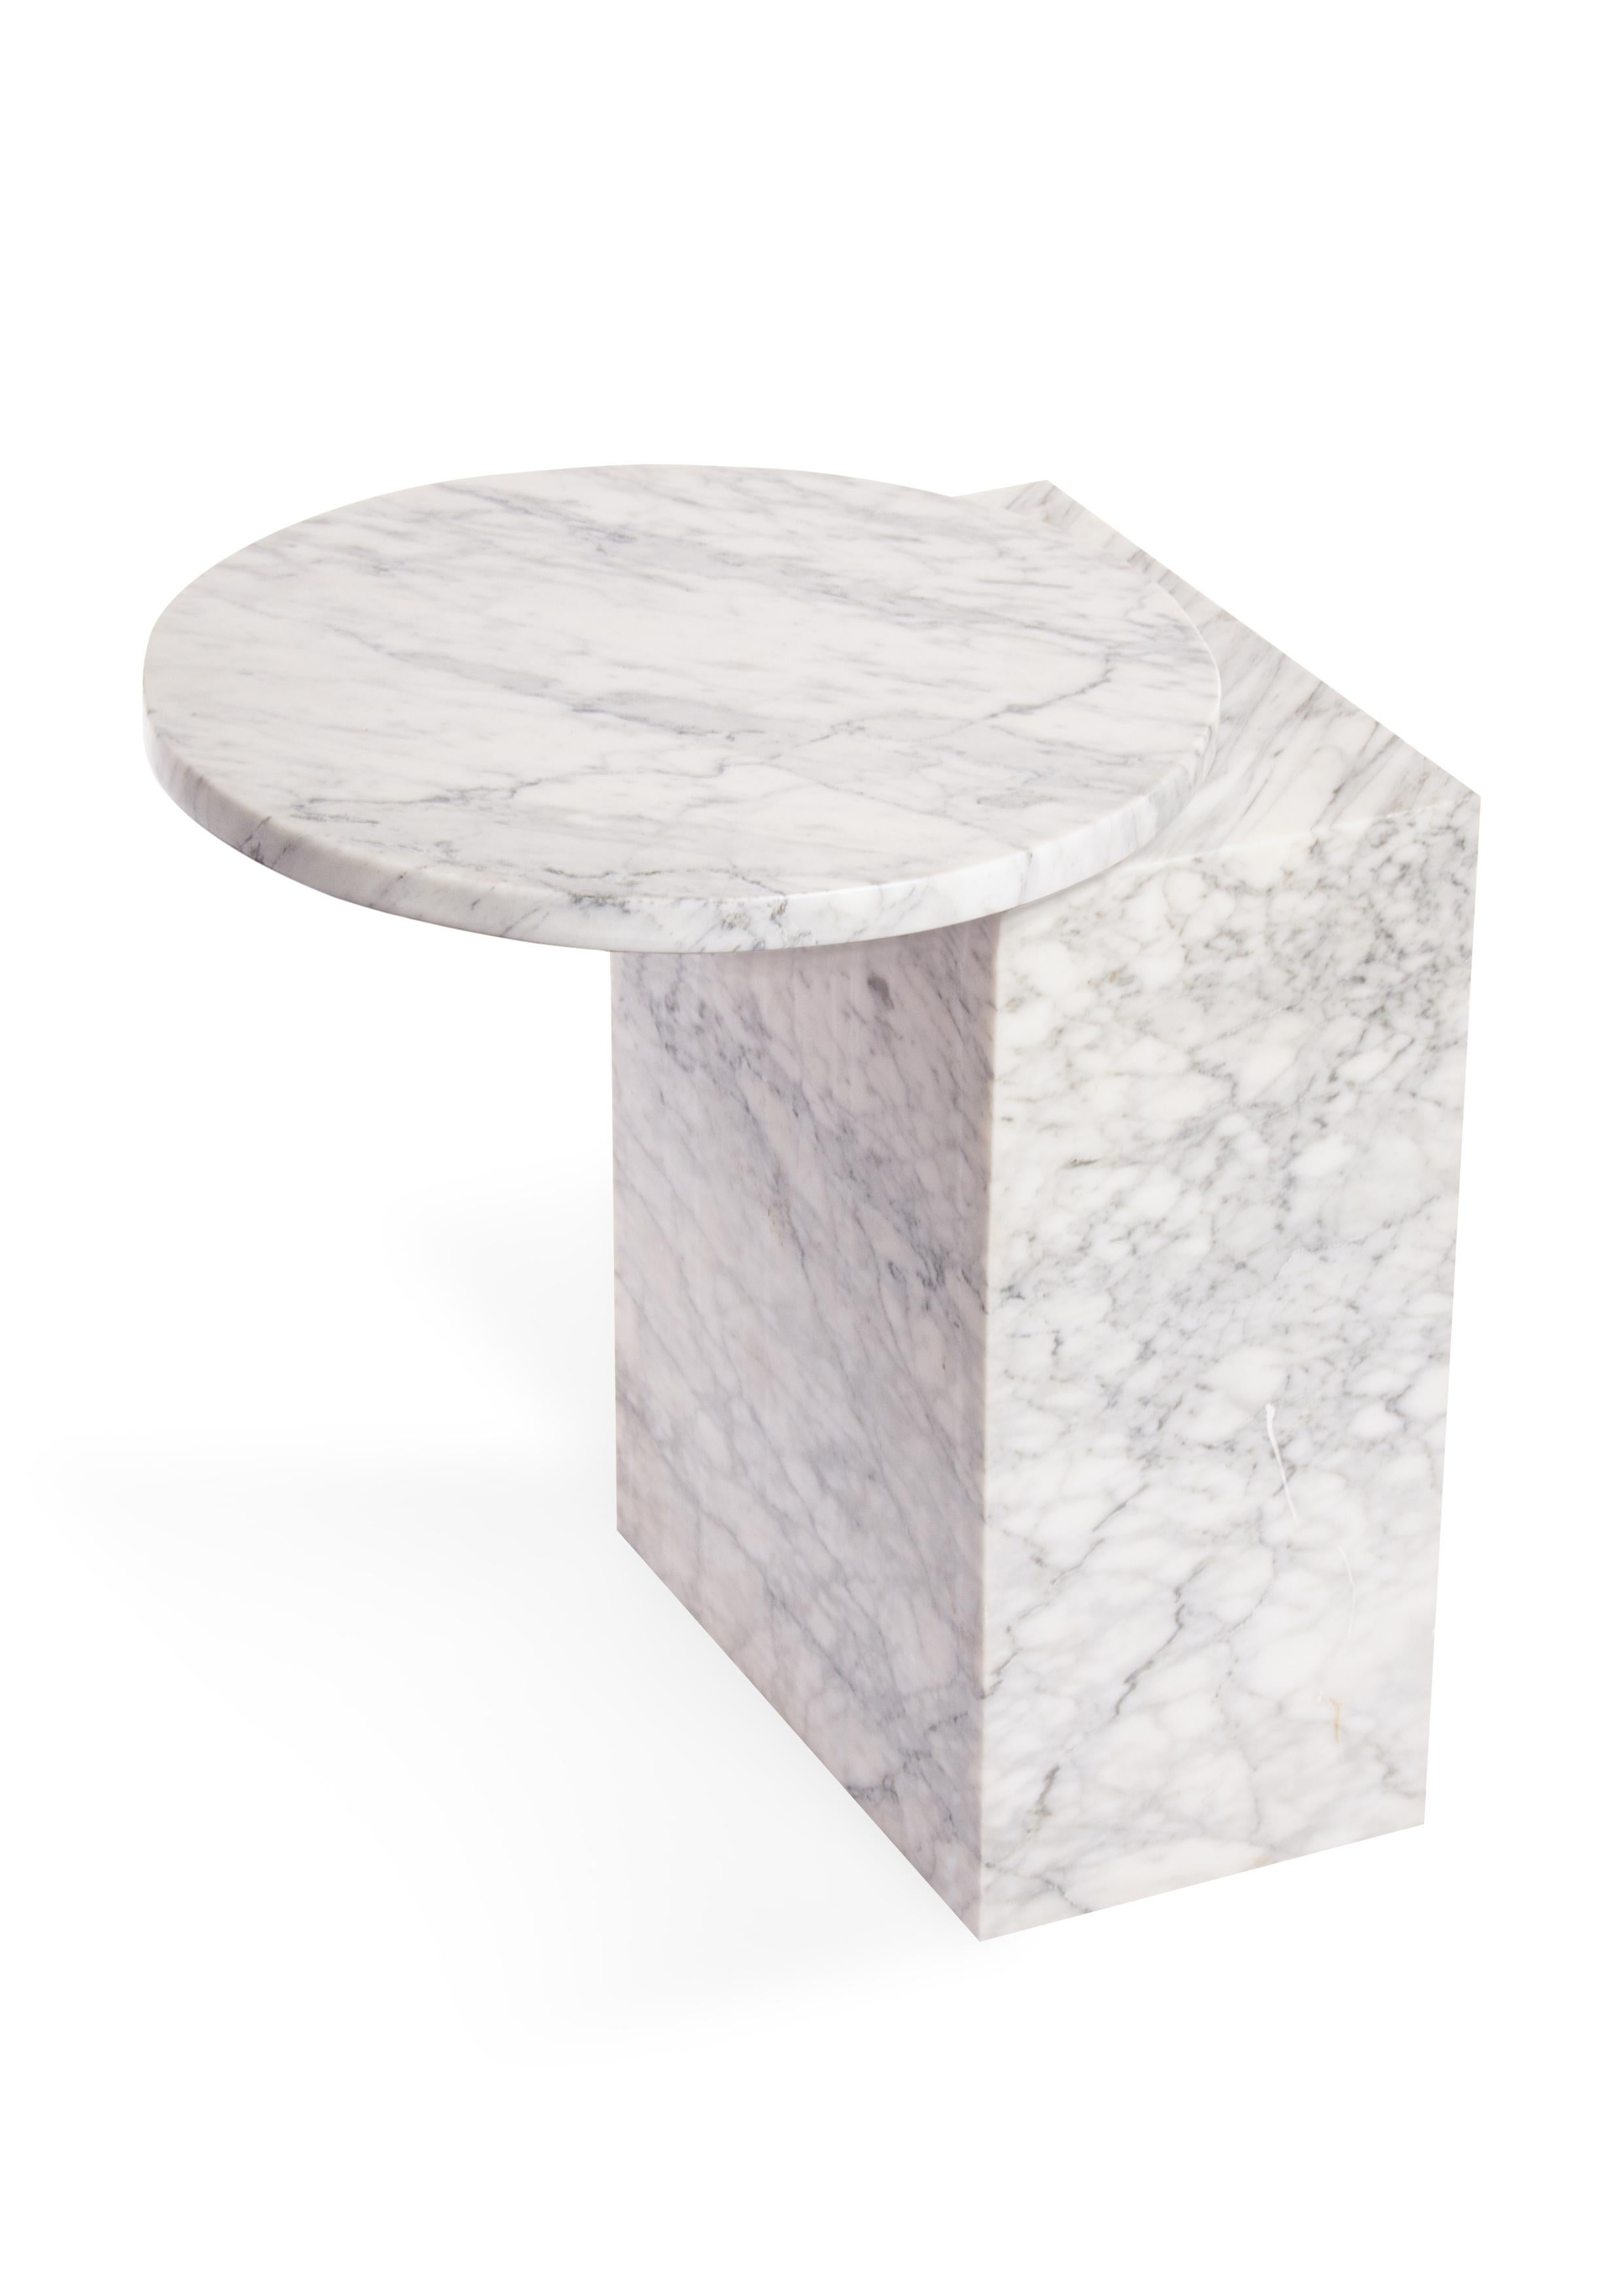 Stainless Steel Configurable Geometry II Side Table by Sten Studio, REP by Tuleste Factory For Sale